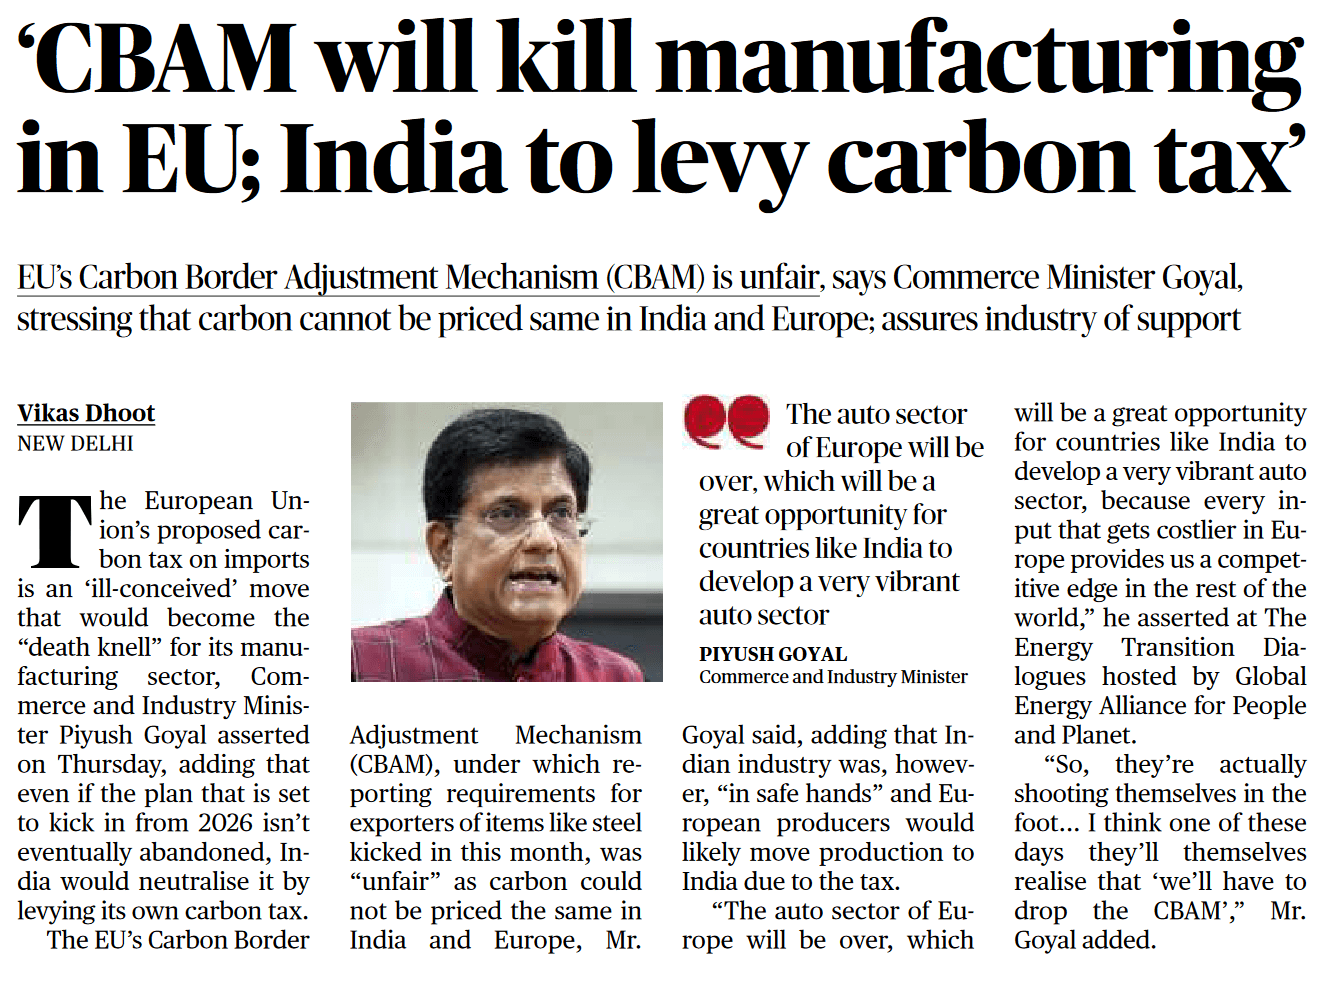 CBAM will kill manufacturing in EU; India to levy carbon tax - Page No.16, GS 3